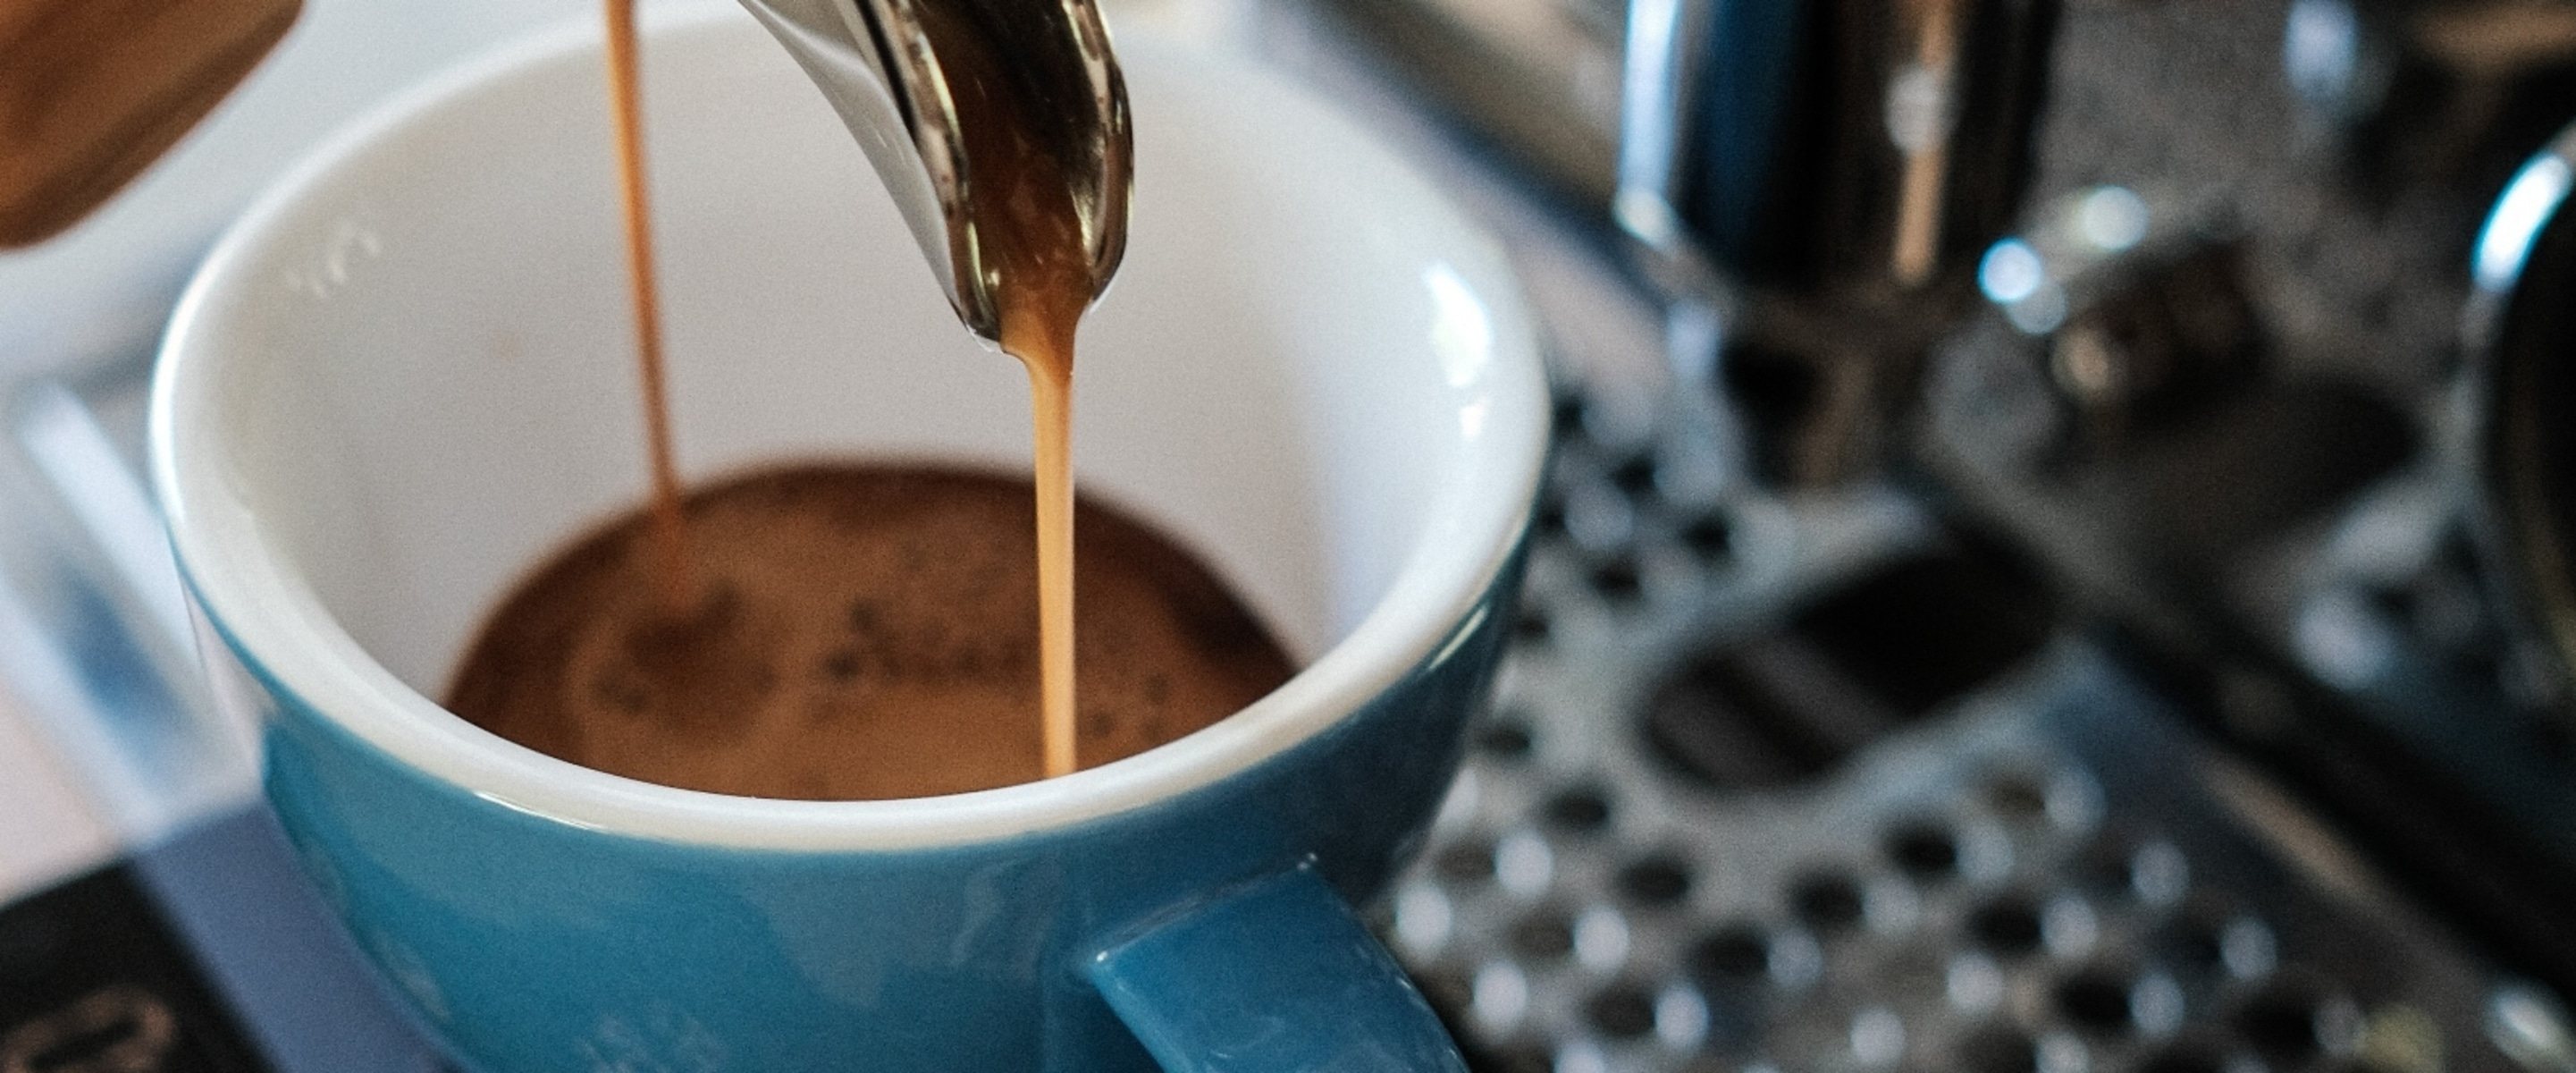 Love Good Strong Coffee? Check Out These Top Espresso Makers